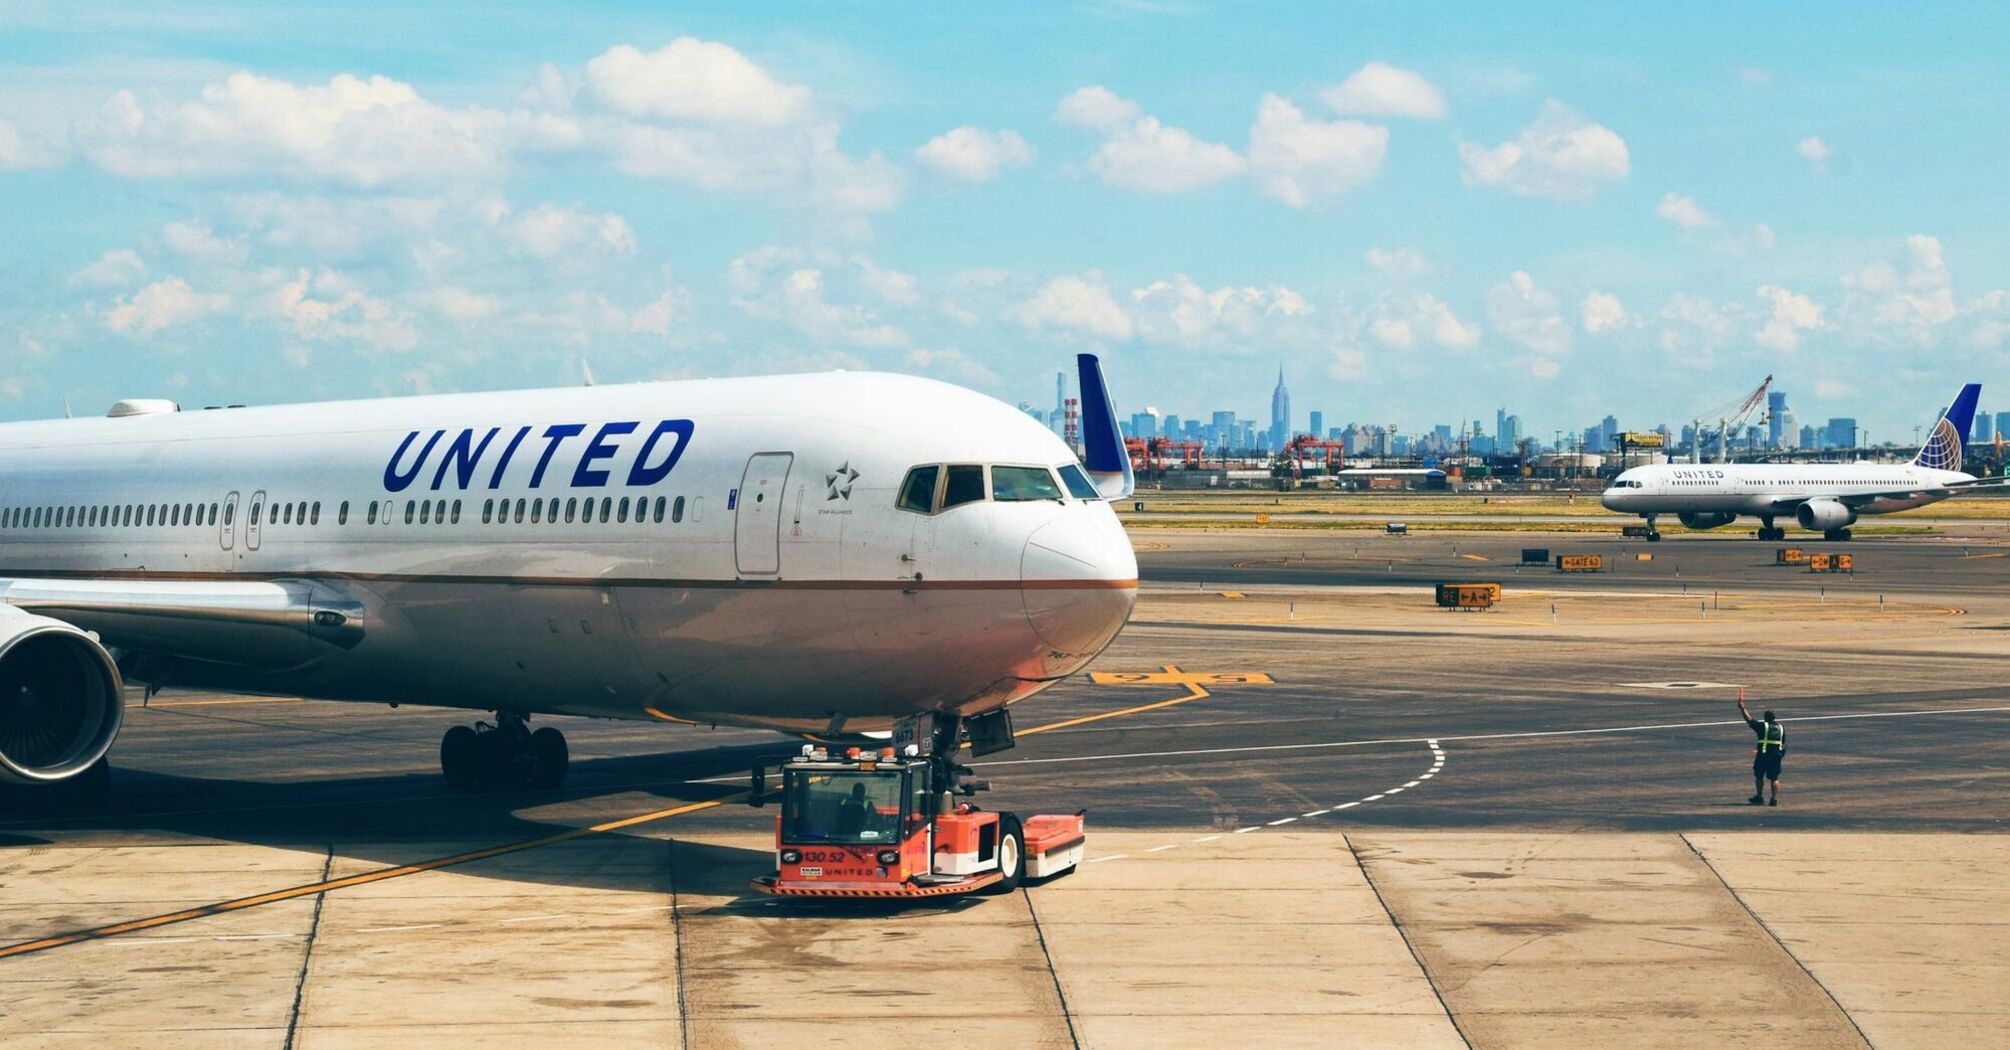 United Airlines airplane on tarmac at airport